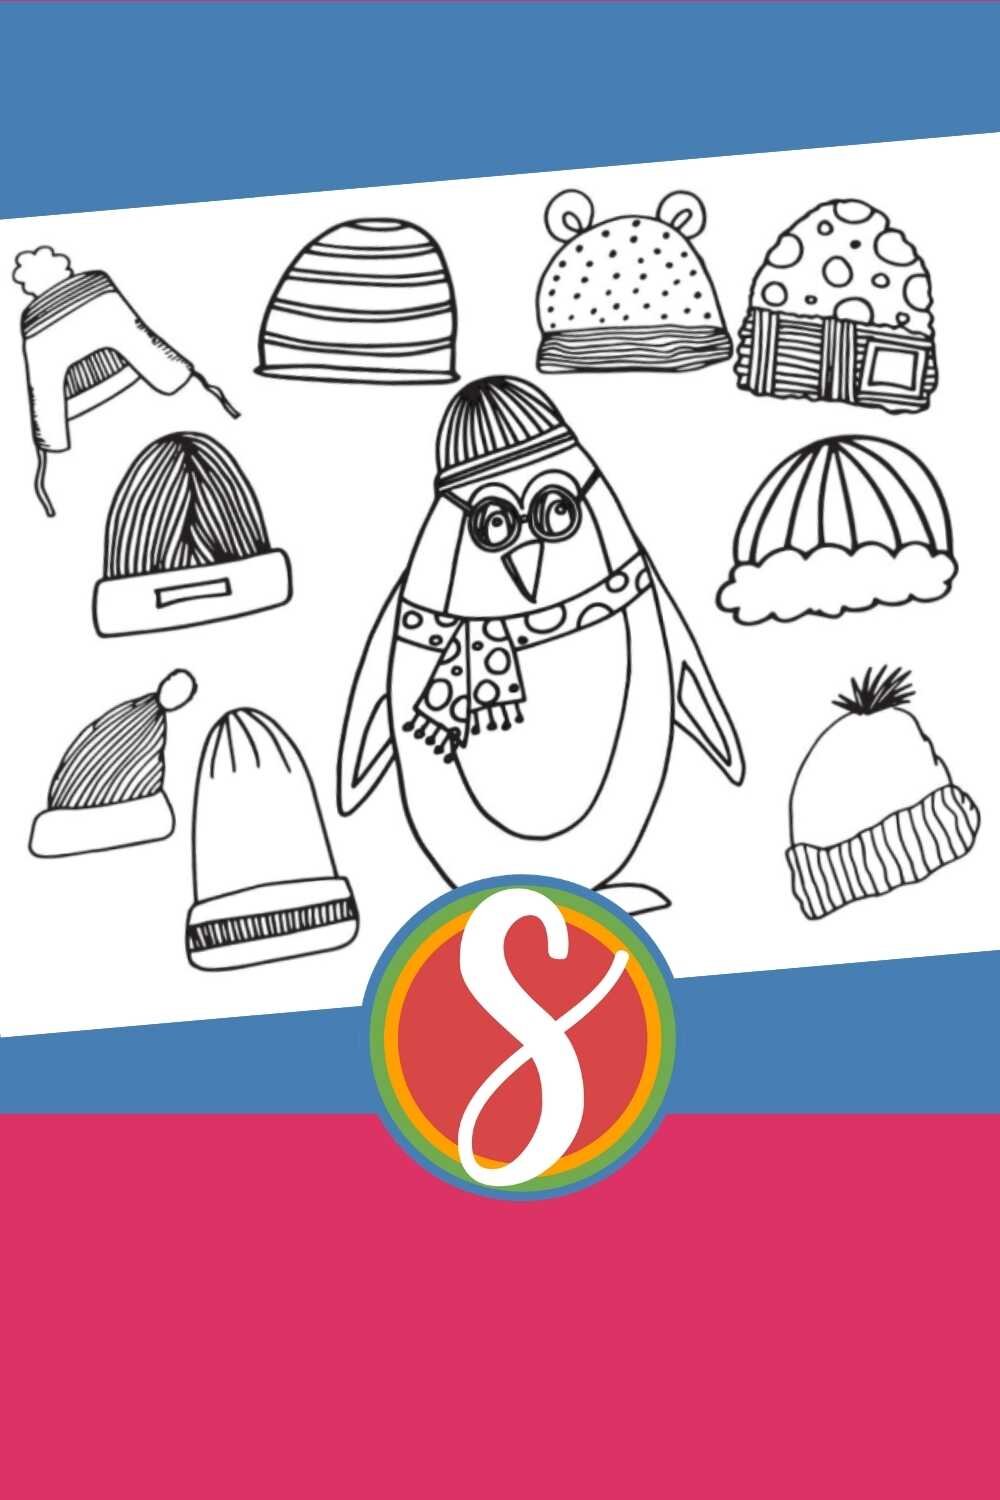 Winter Penguin With Winter Hats - Free Penguin Coloring Page